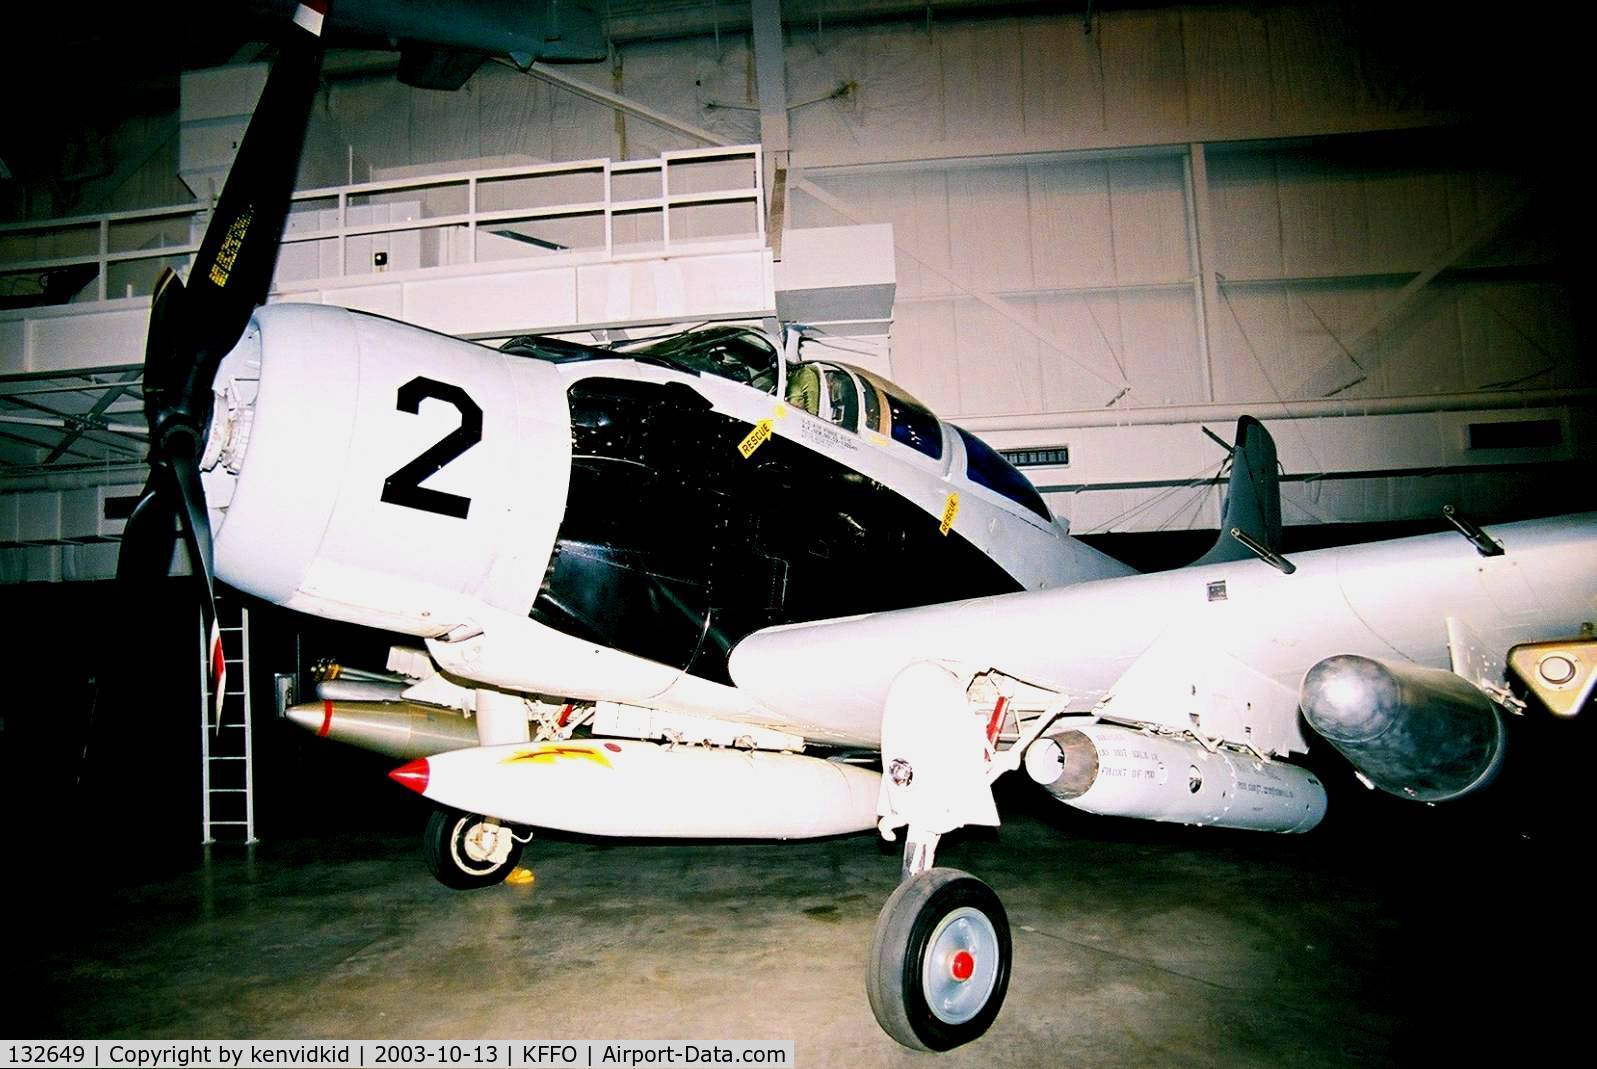 132649, 1952 Douglas A-1E Skyraider C/N 9506, At the Museum of the United States Air Force Dayton Ohio.